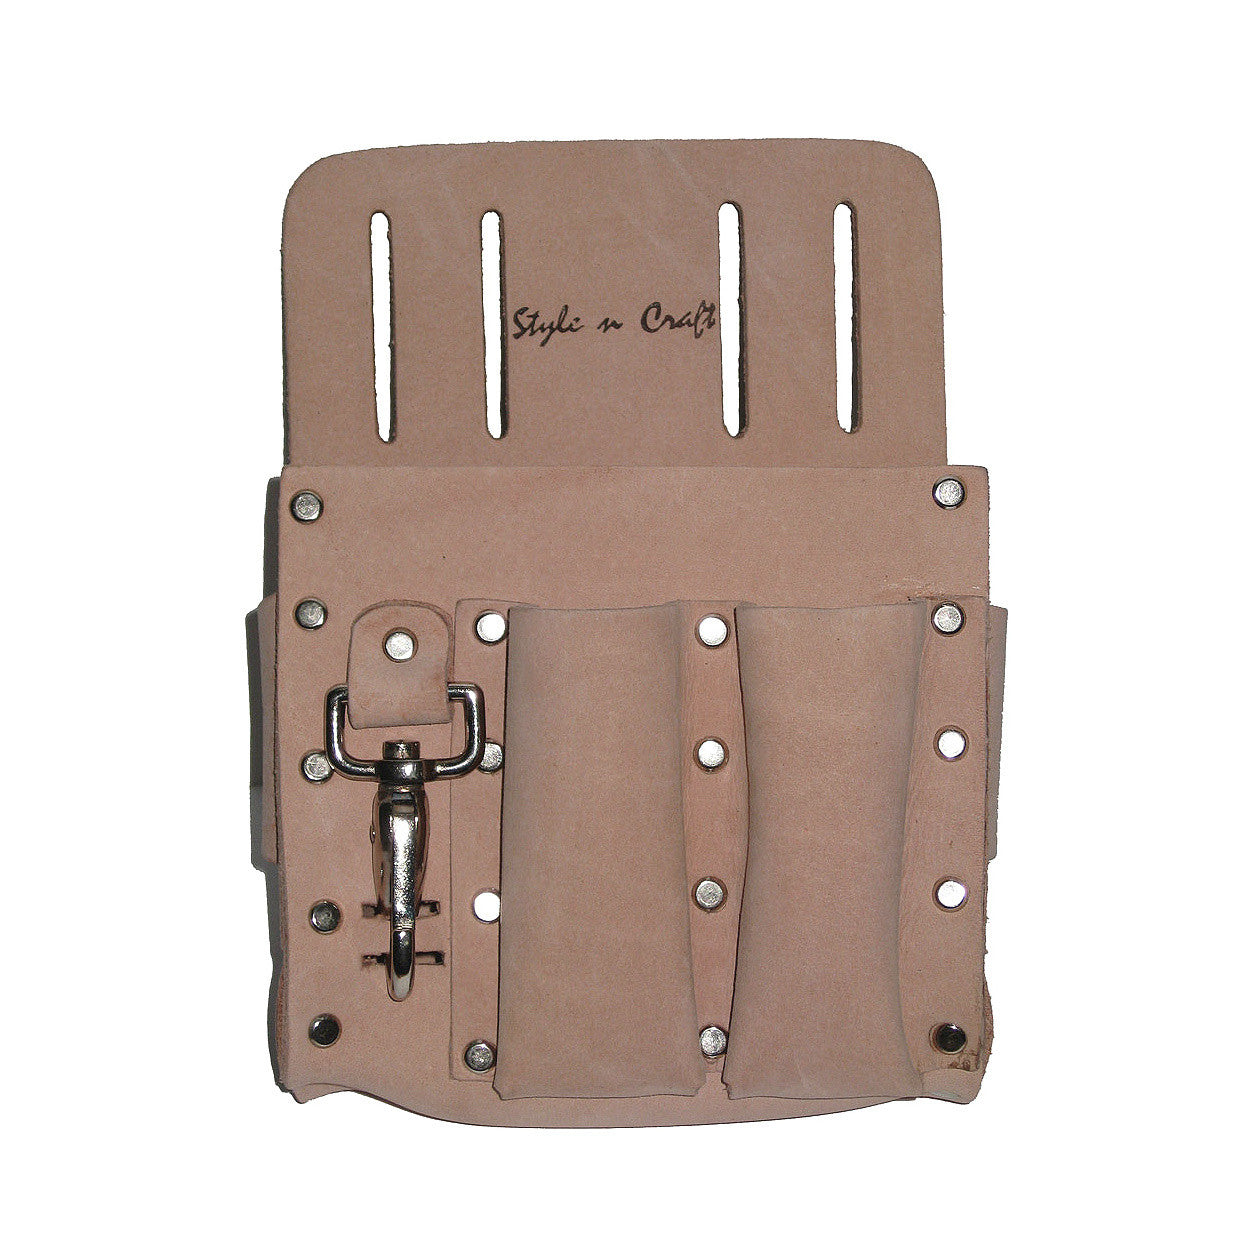 5 Pocket Electrician's Tool Pouch in Heavy Top Grain Leather